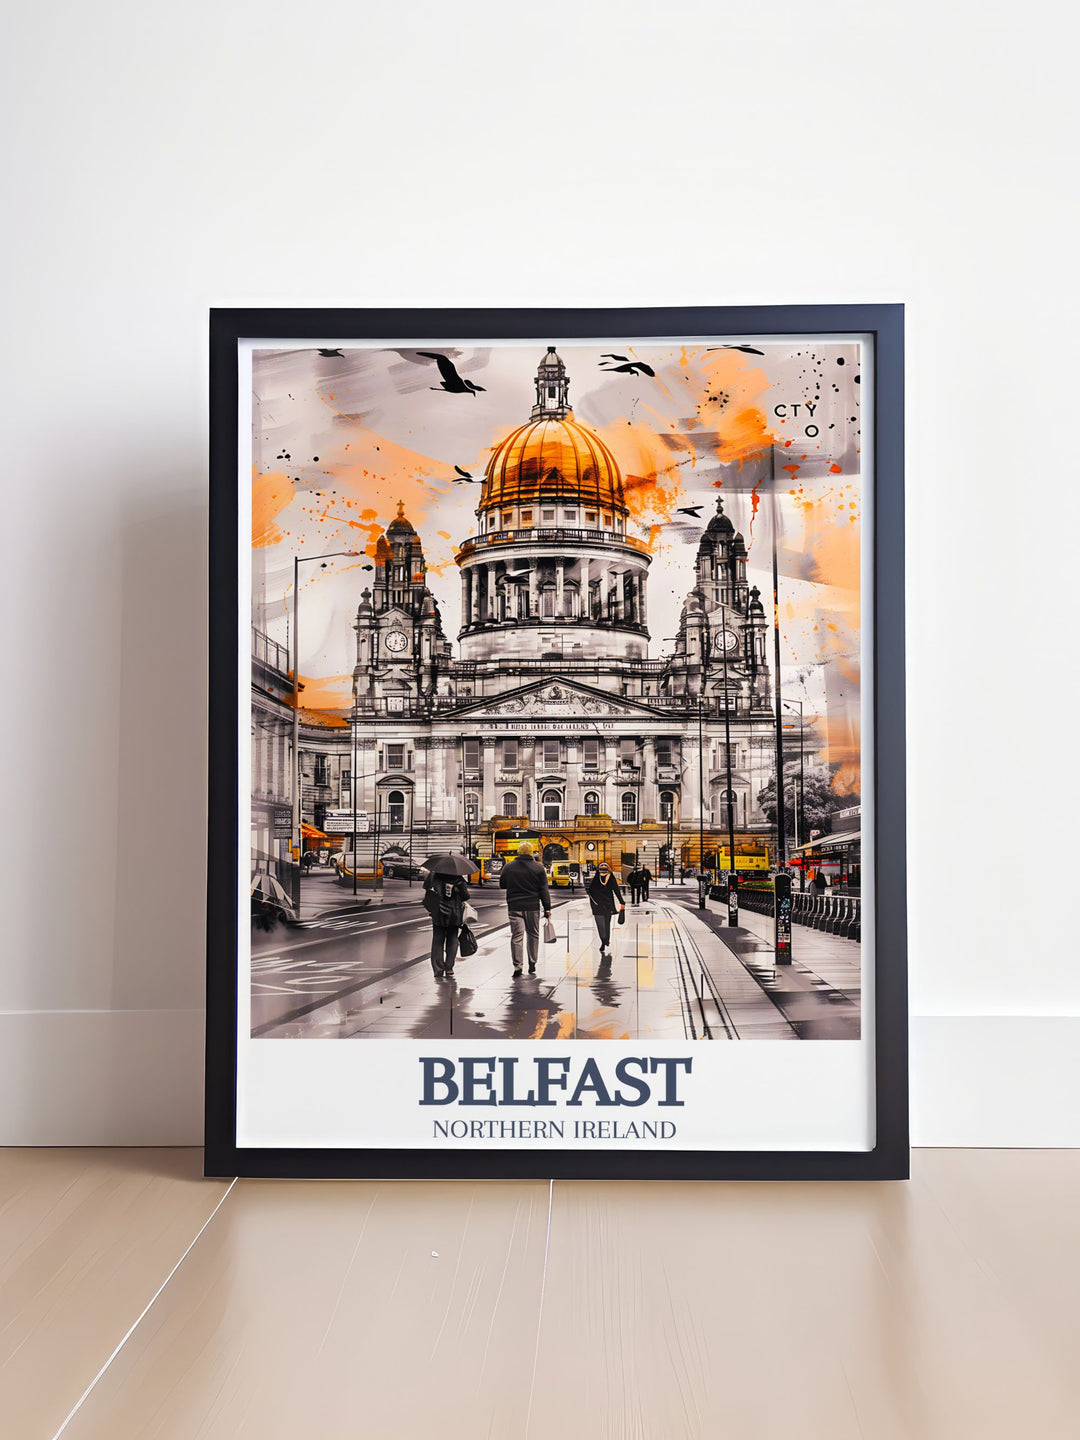 Elegant City Hall Donegall Square prints featuring the detailed architecture of Belfasts City Hall. Perfect for adding to your collection of Ireland posters and UK art, making a stylish statement in any room.